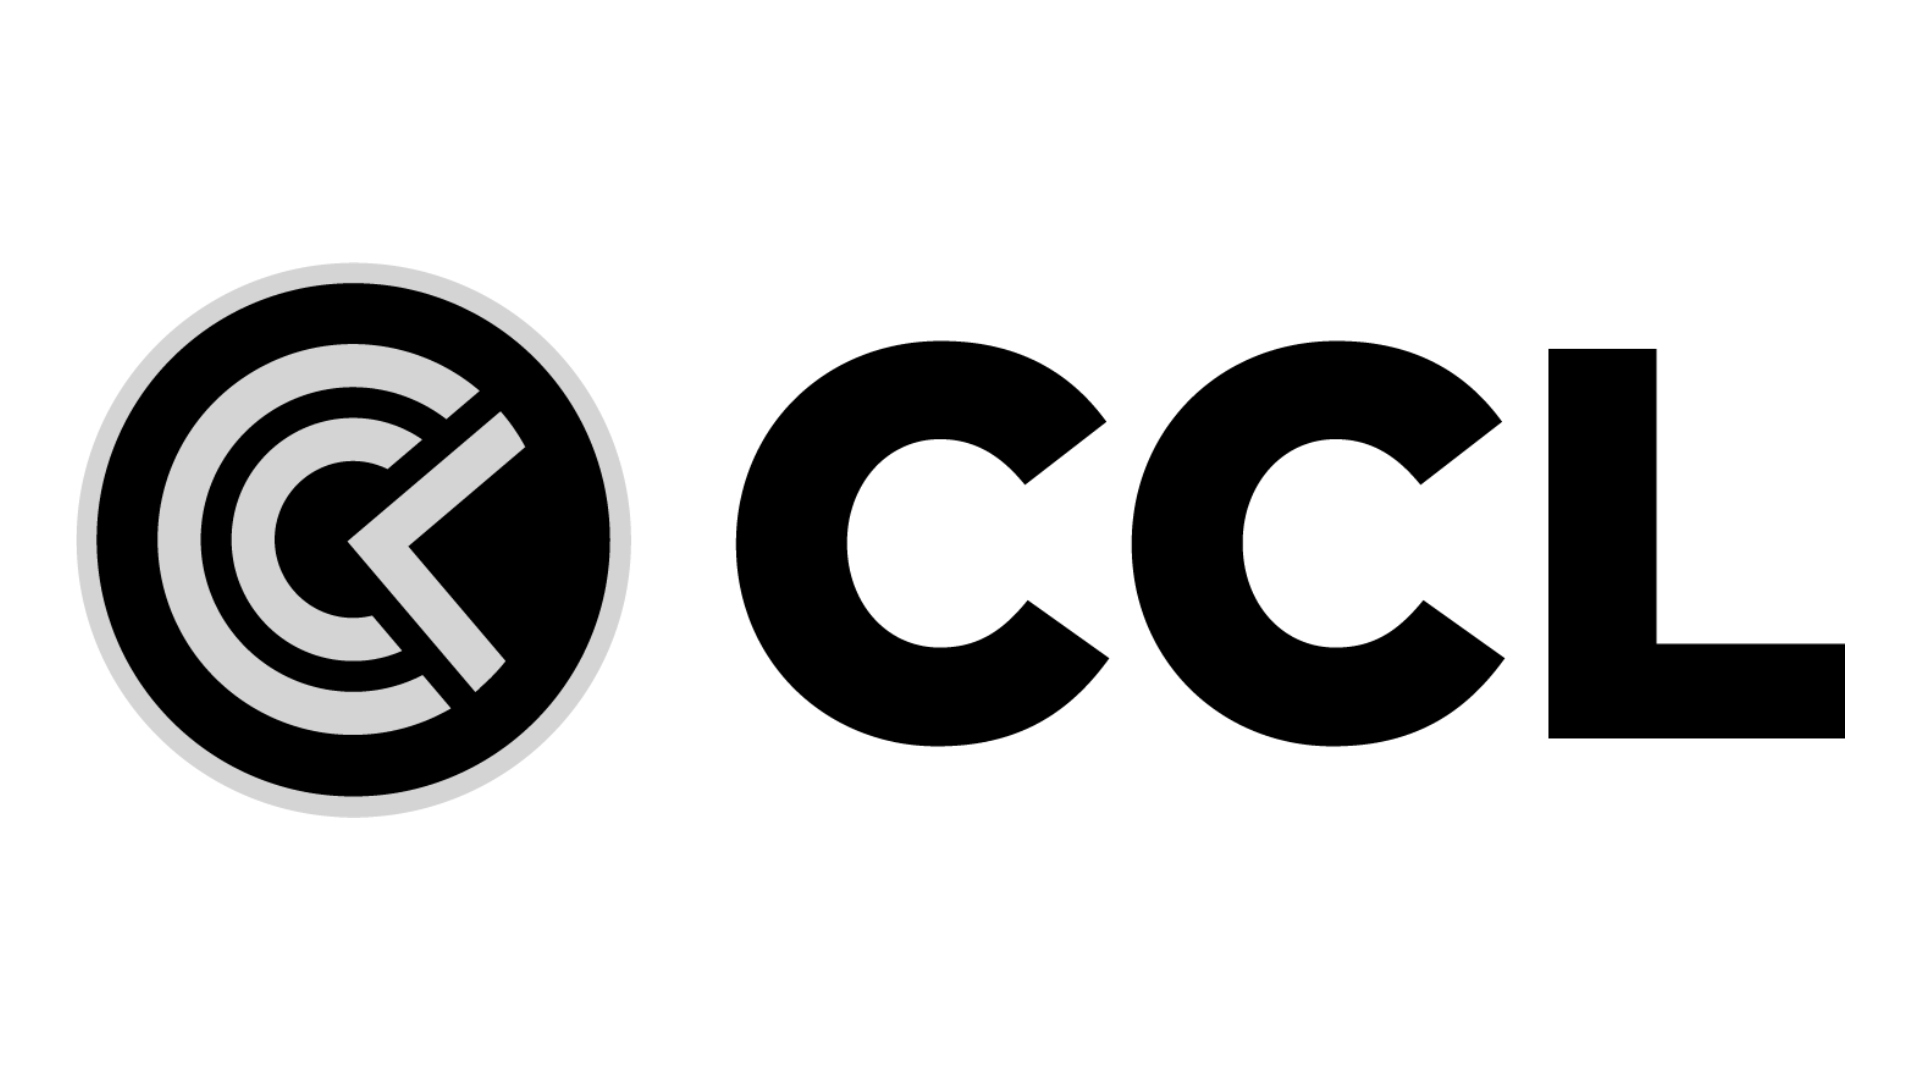 Best websites for custom PC buildings, number 7: CCL, their logo is on a white background.